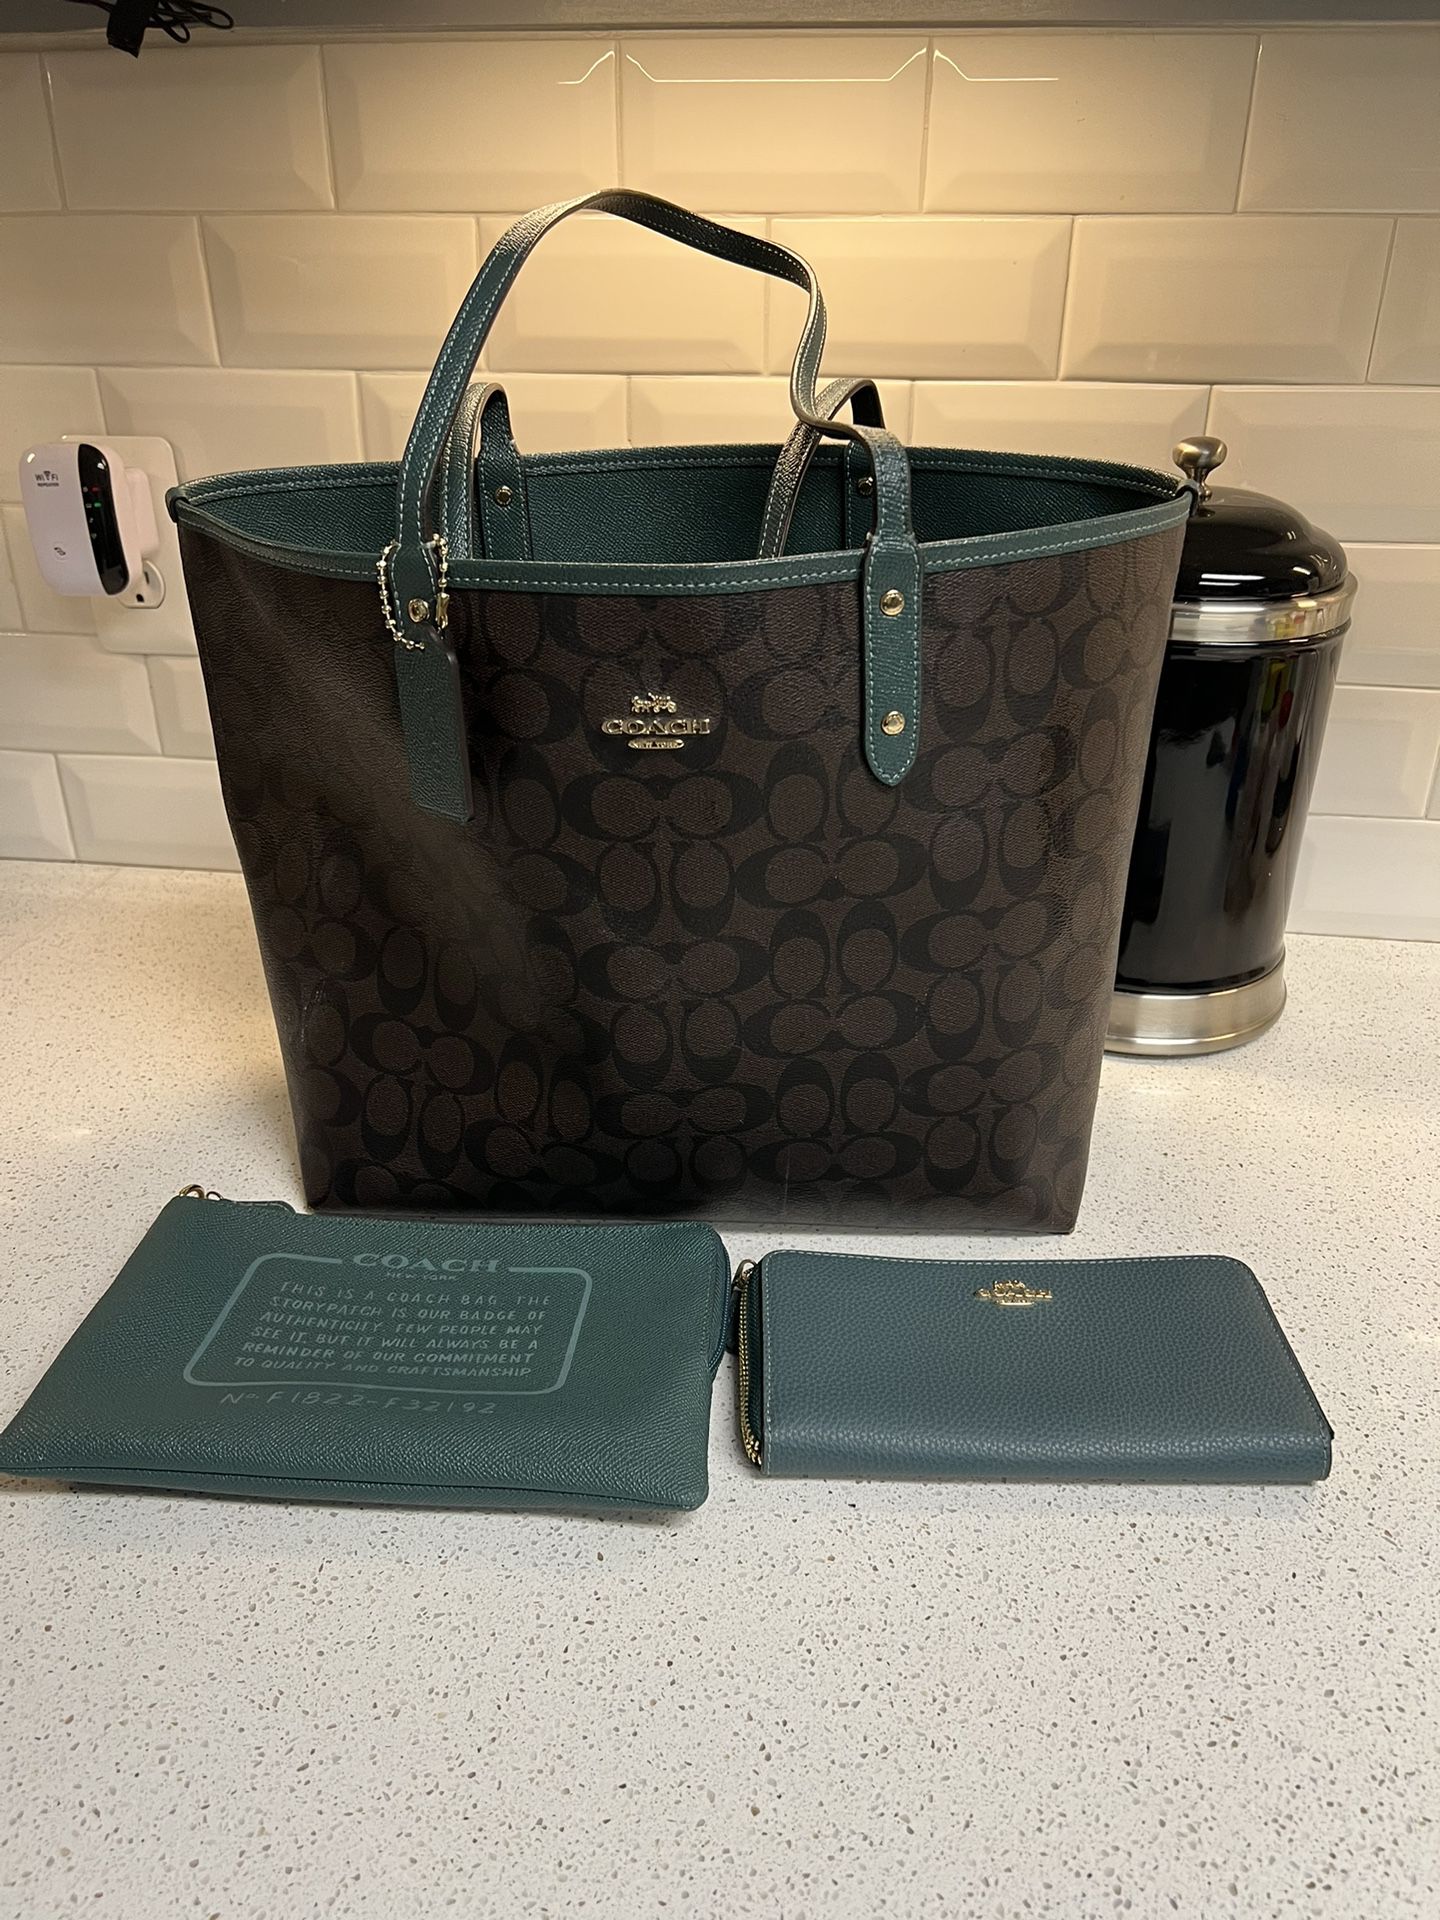 3 PC Coach Set  With Reversible Tote, Wallet & Pouch